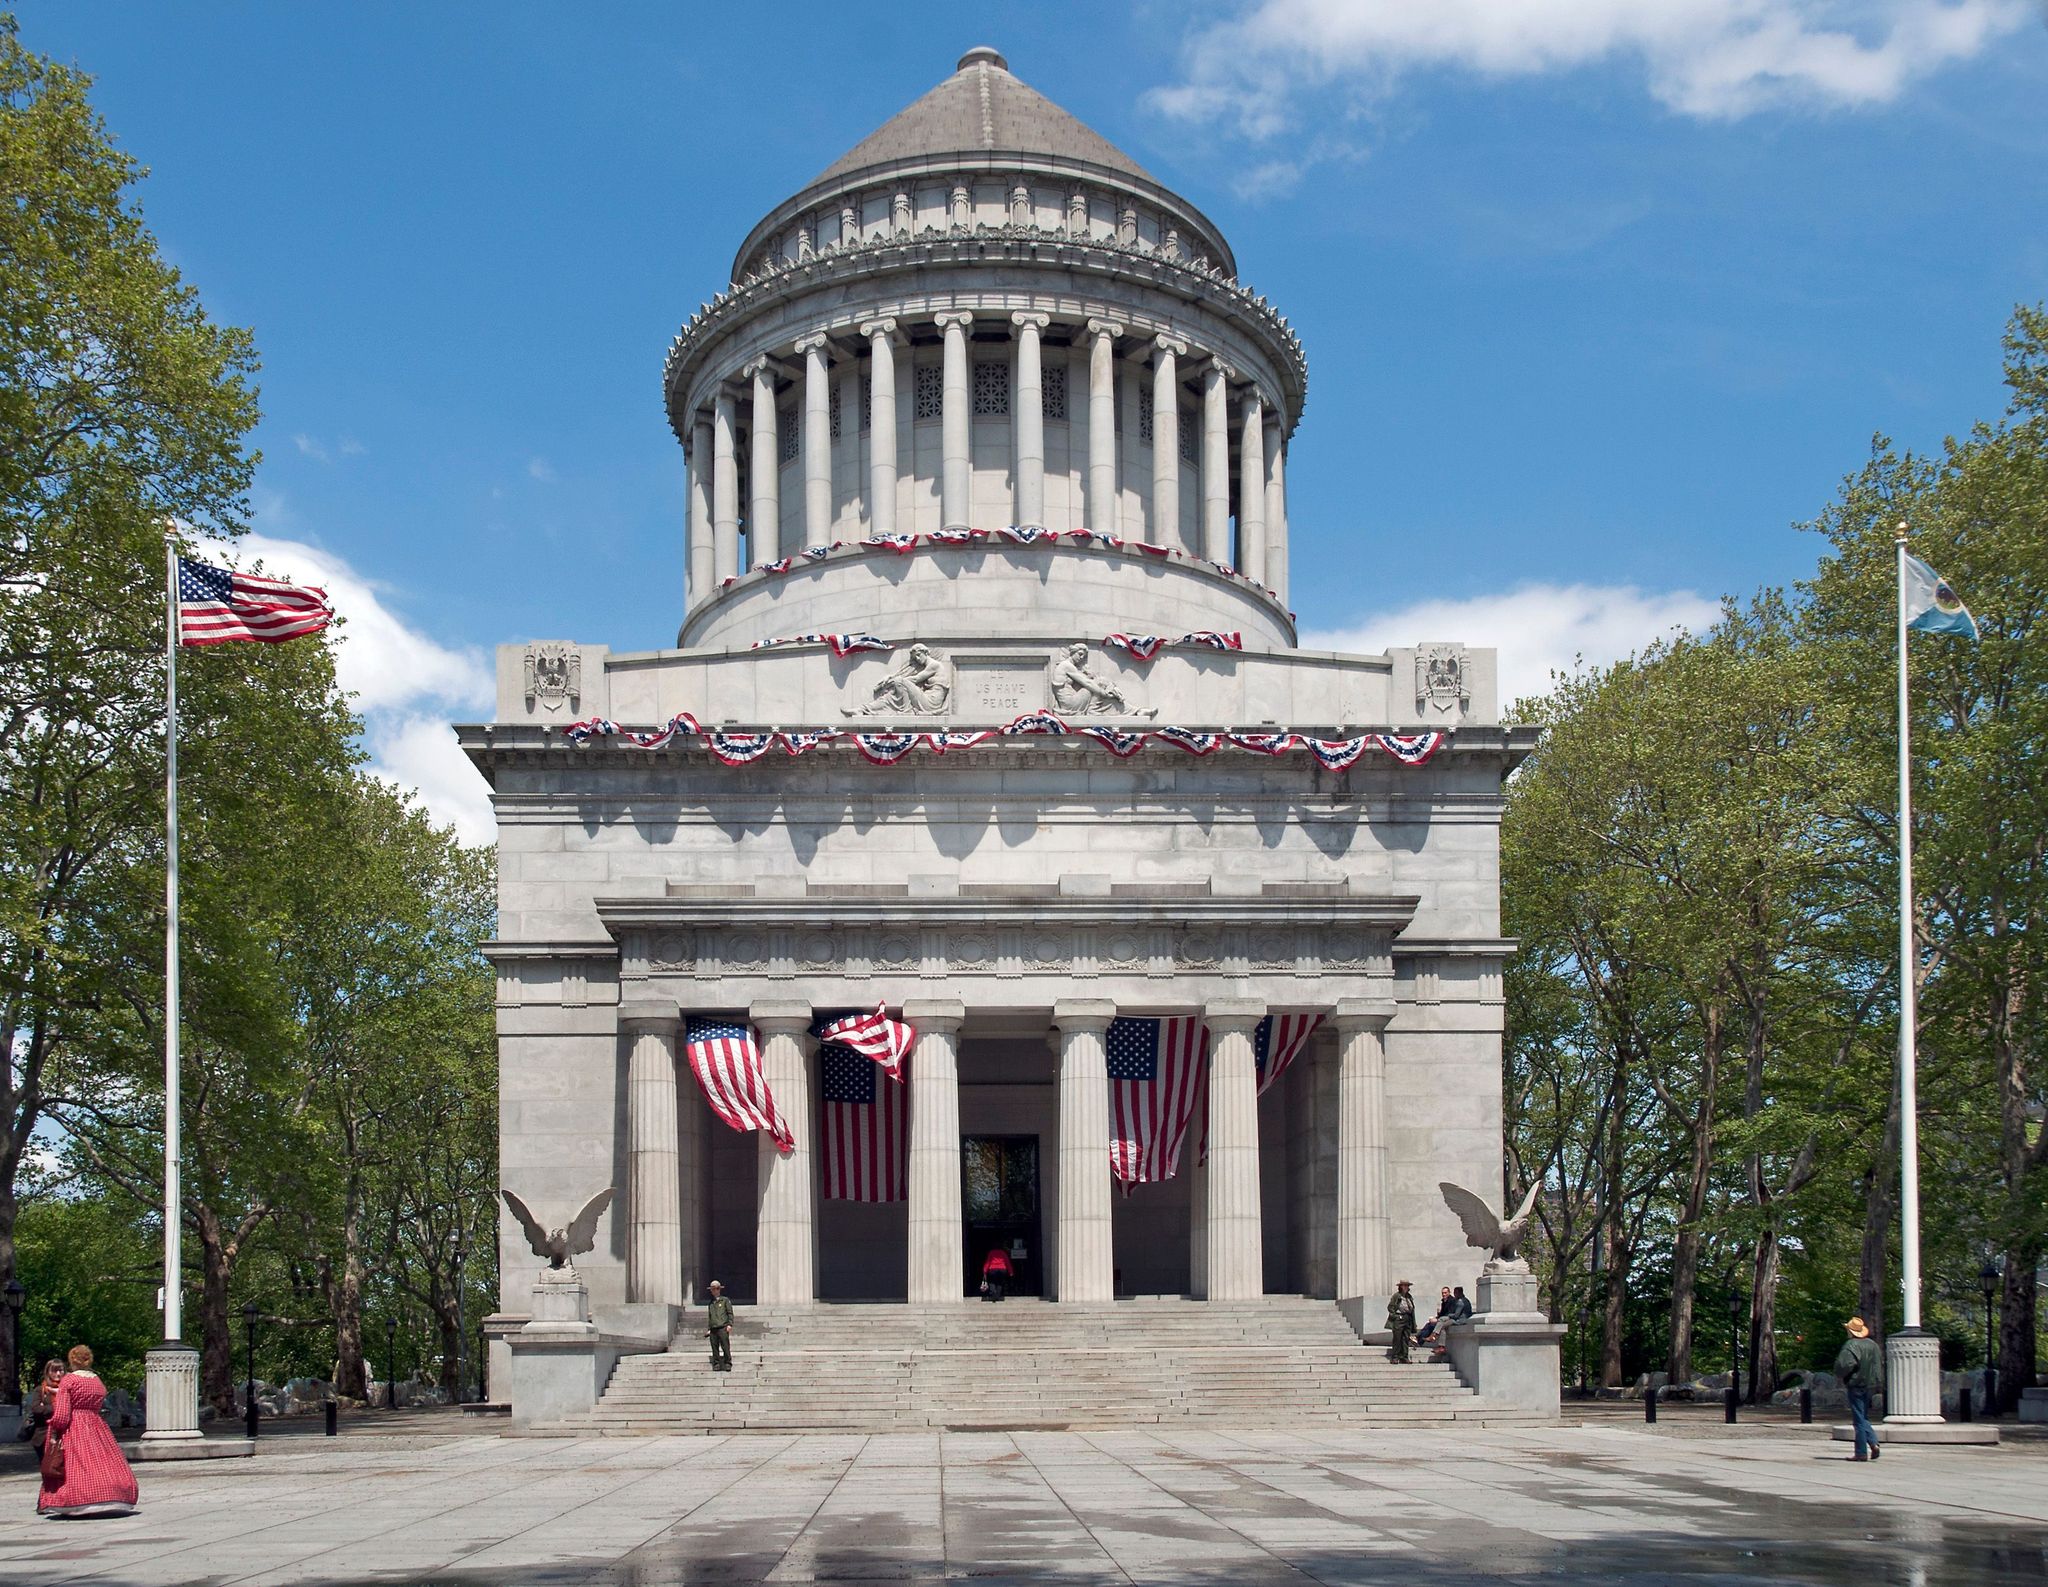 The Mausoleum is the final resting place for Ulysses S Grant and his wife Julia D. Grant.